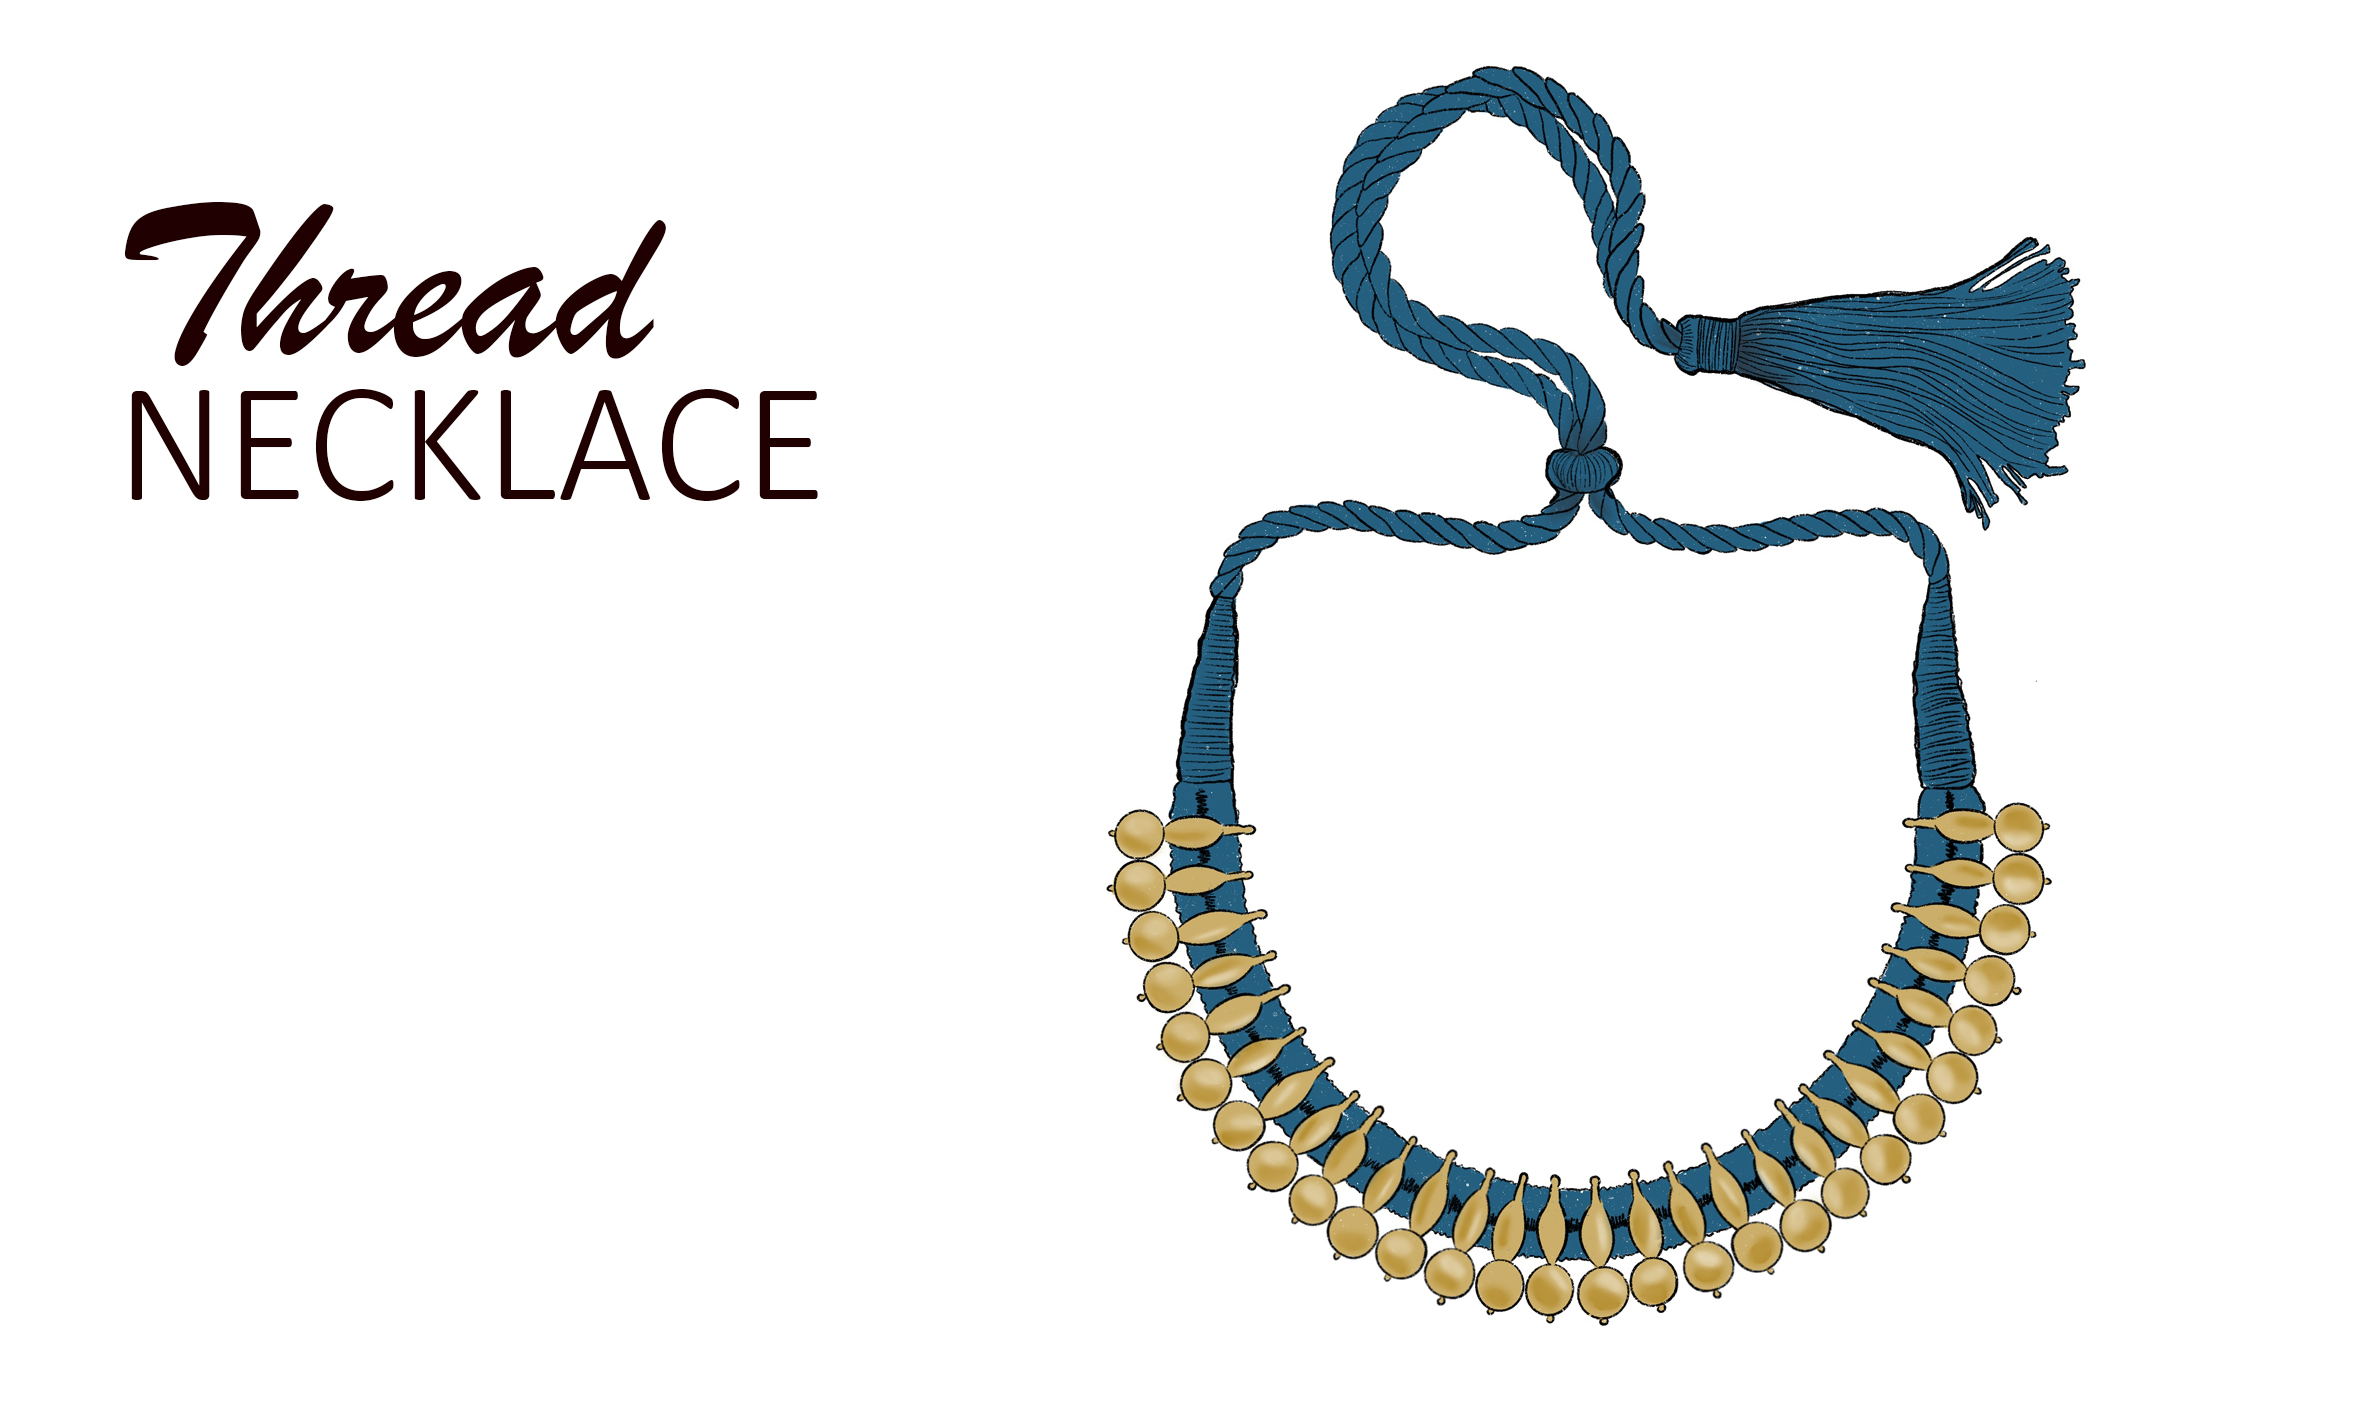 29 Different Types of Necklaces - The Ultimate Guide